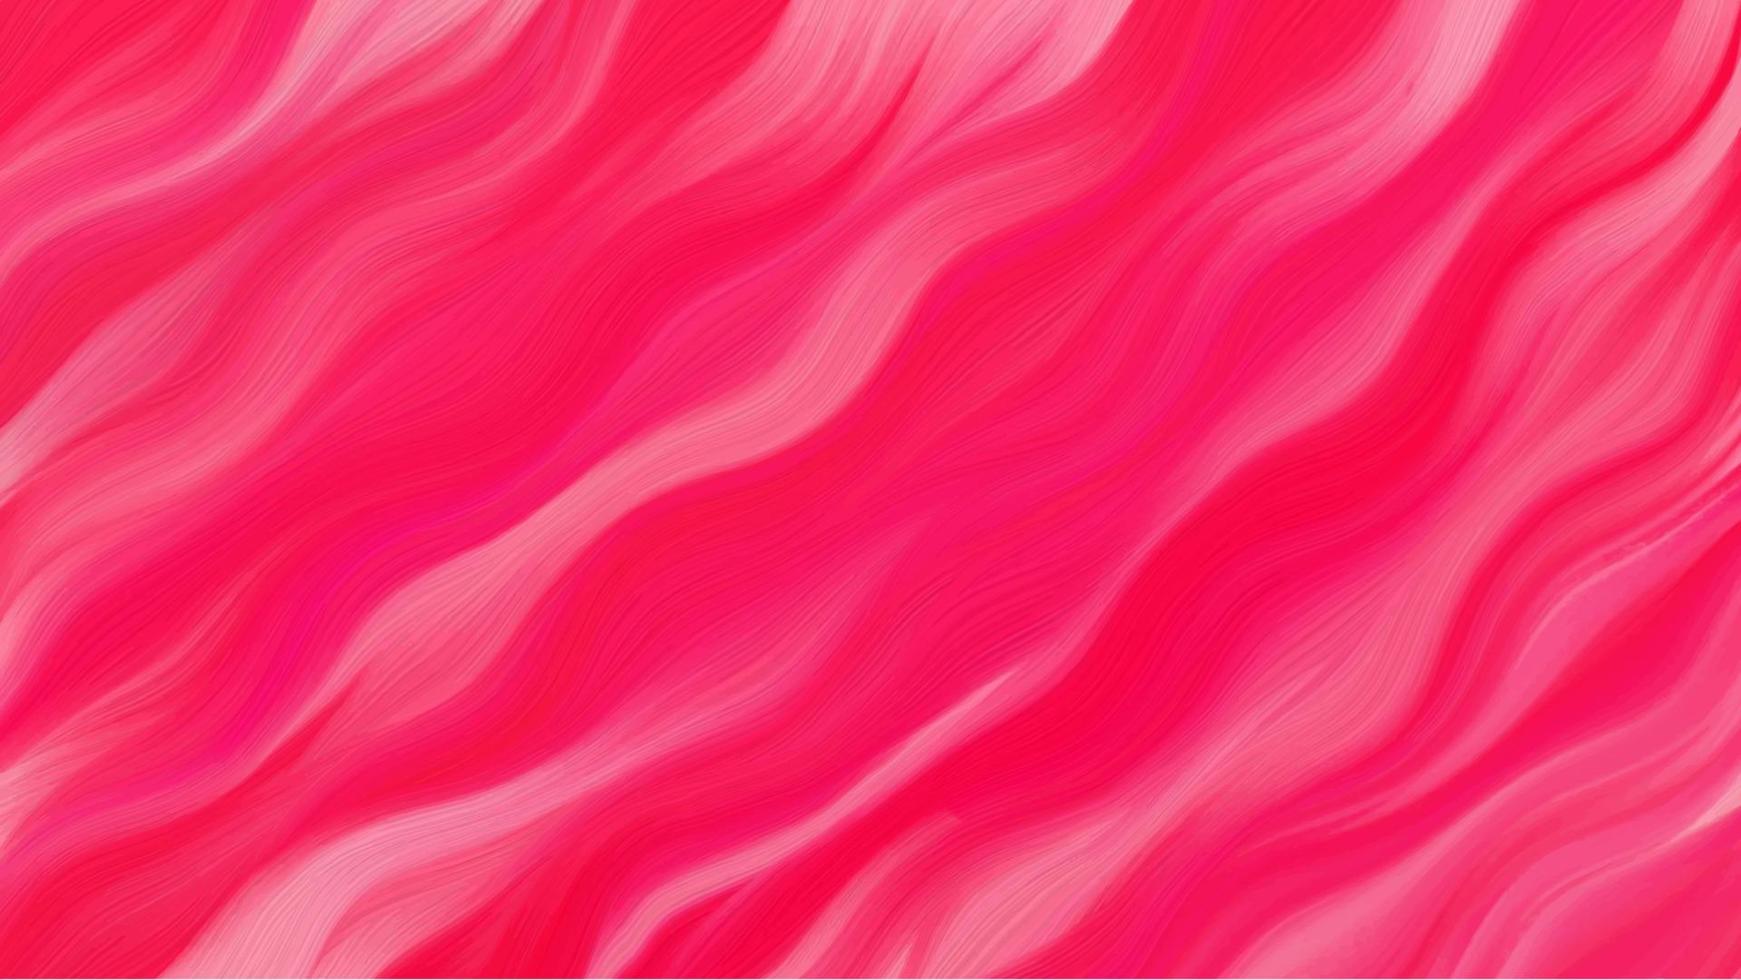 Background for the site. Cover for the first page of the site. Bright picture in pink tones. Vector abstract illustration.